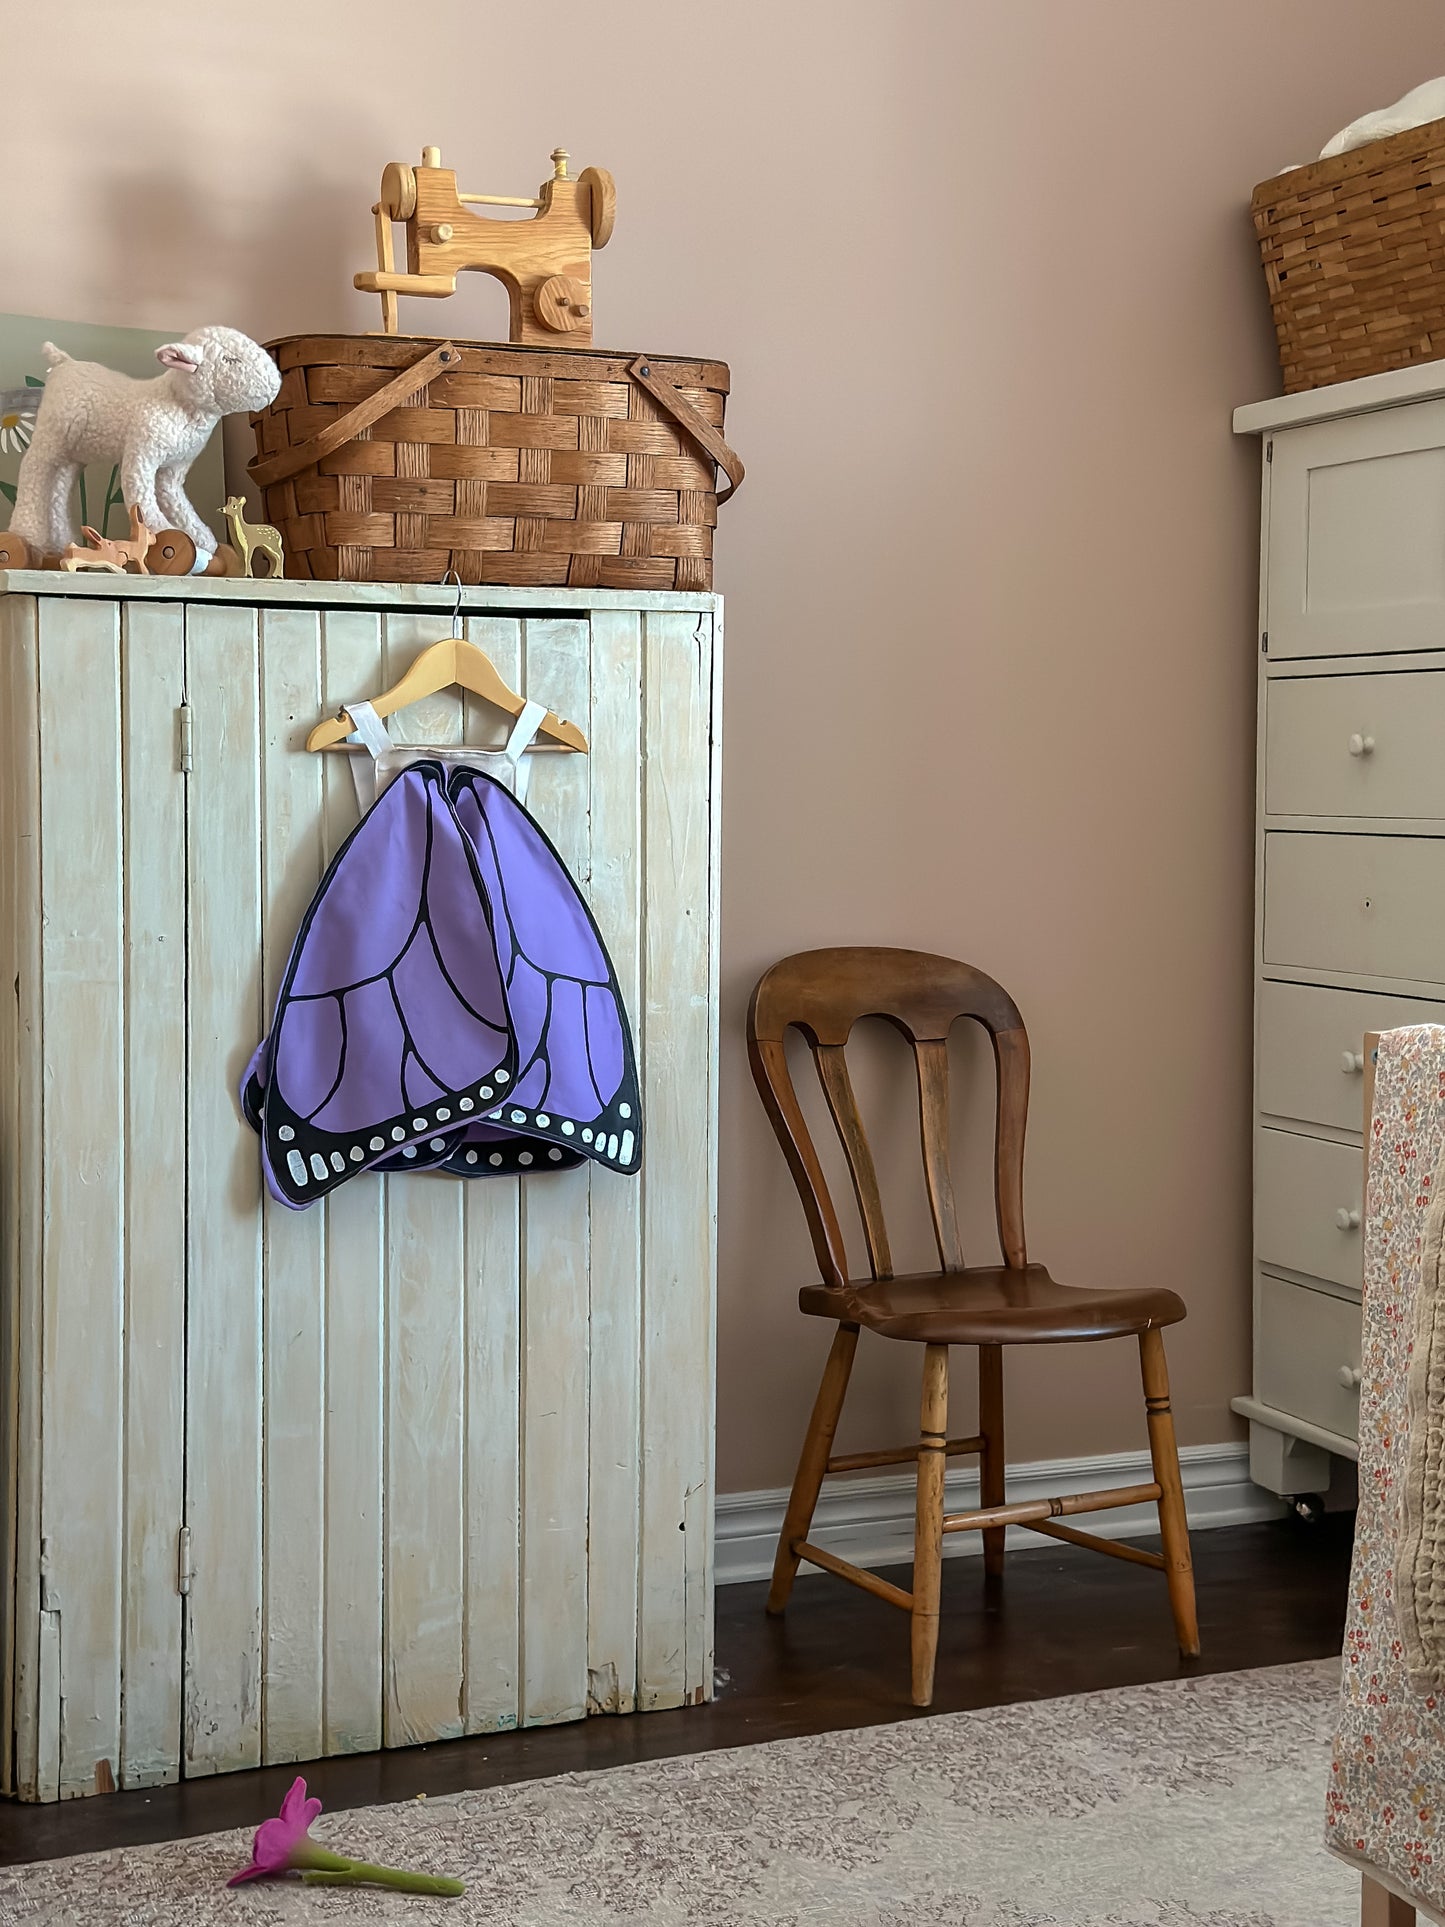 Children's bedroom with purple butterfly wings costume. 